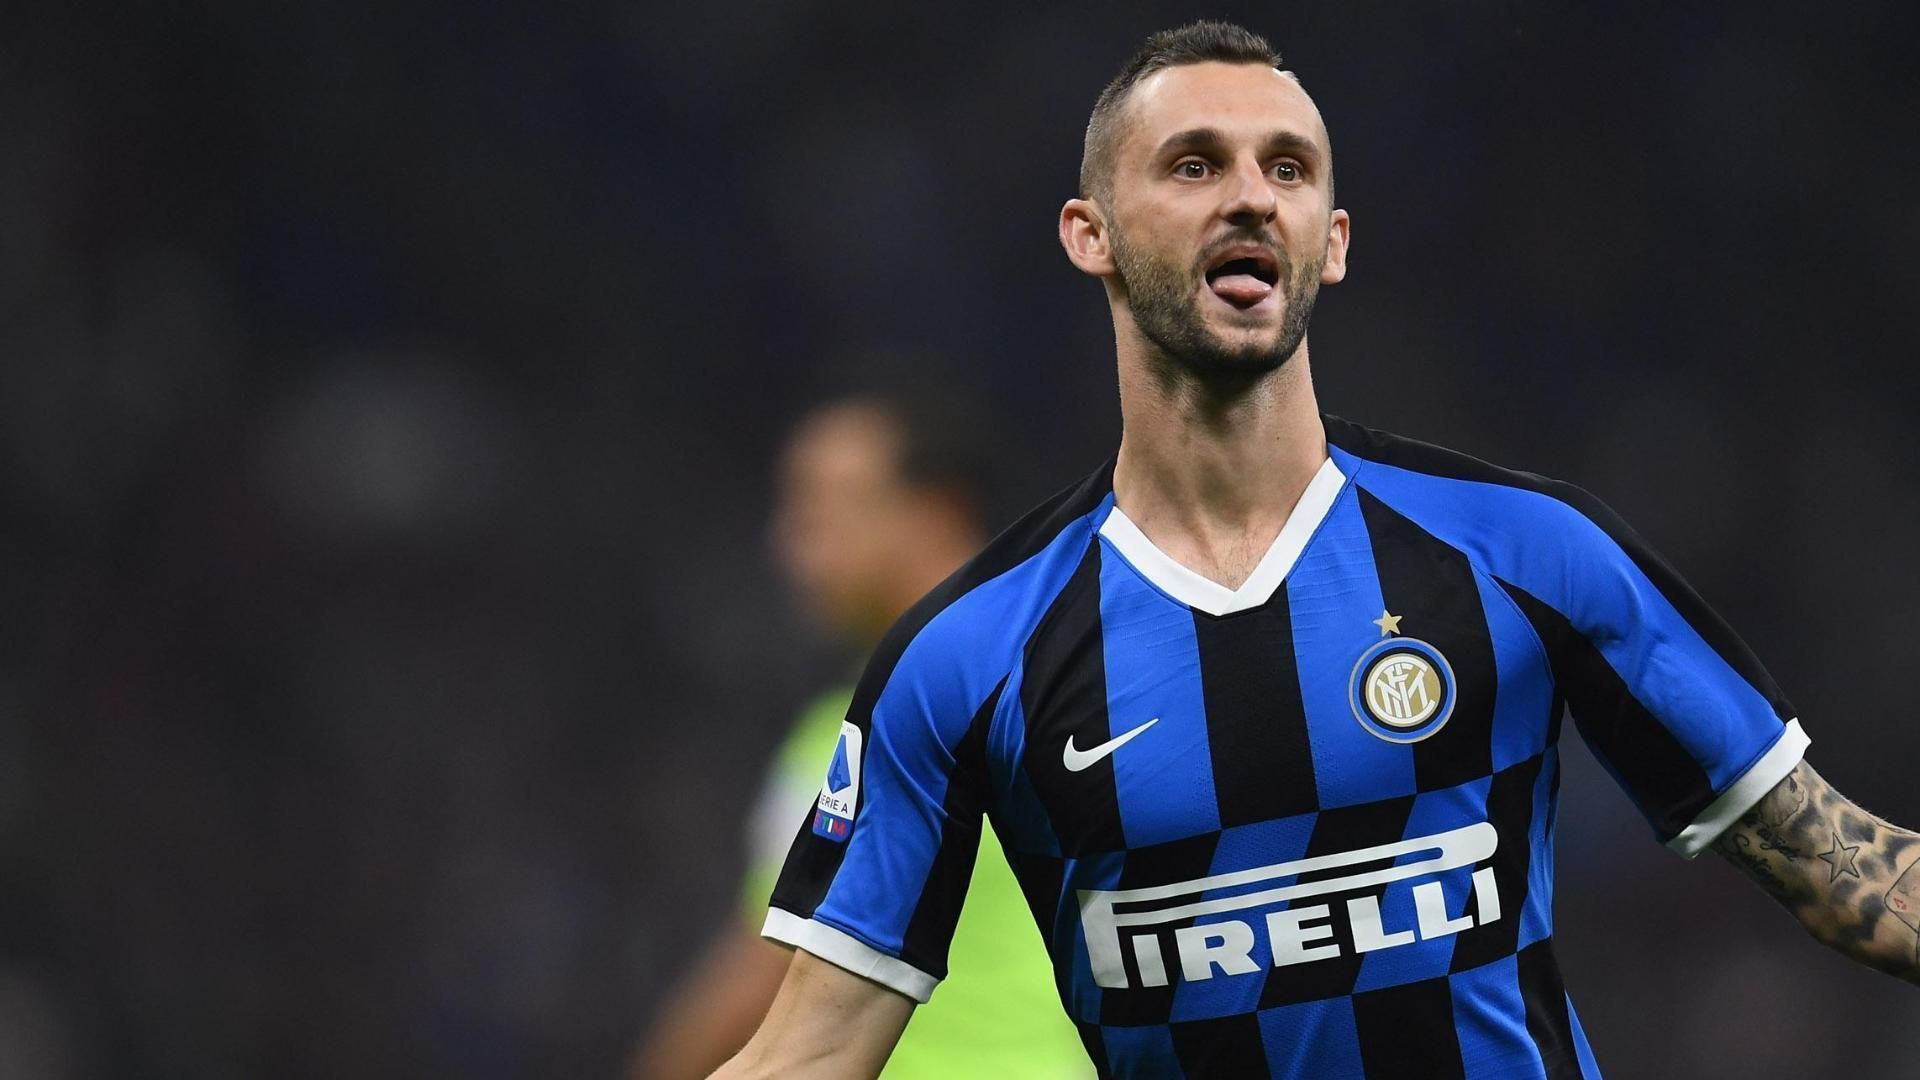 Brozovic's deflected shot gives Inter derby lead